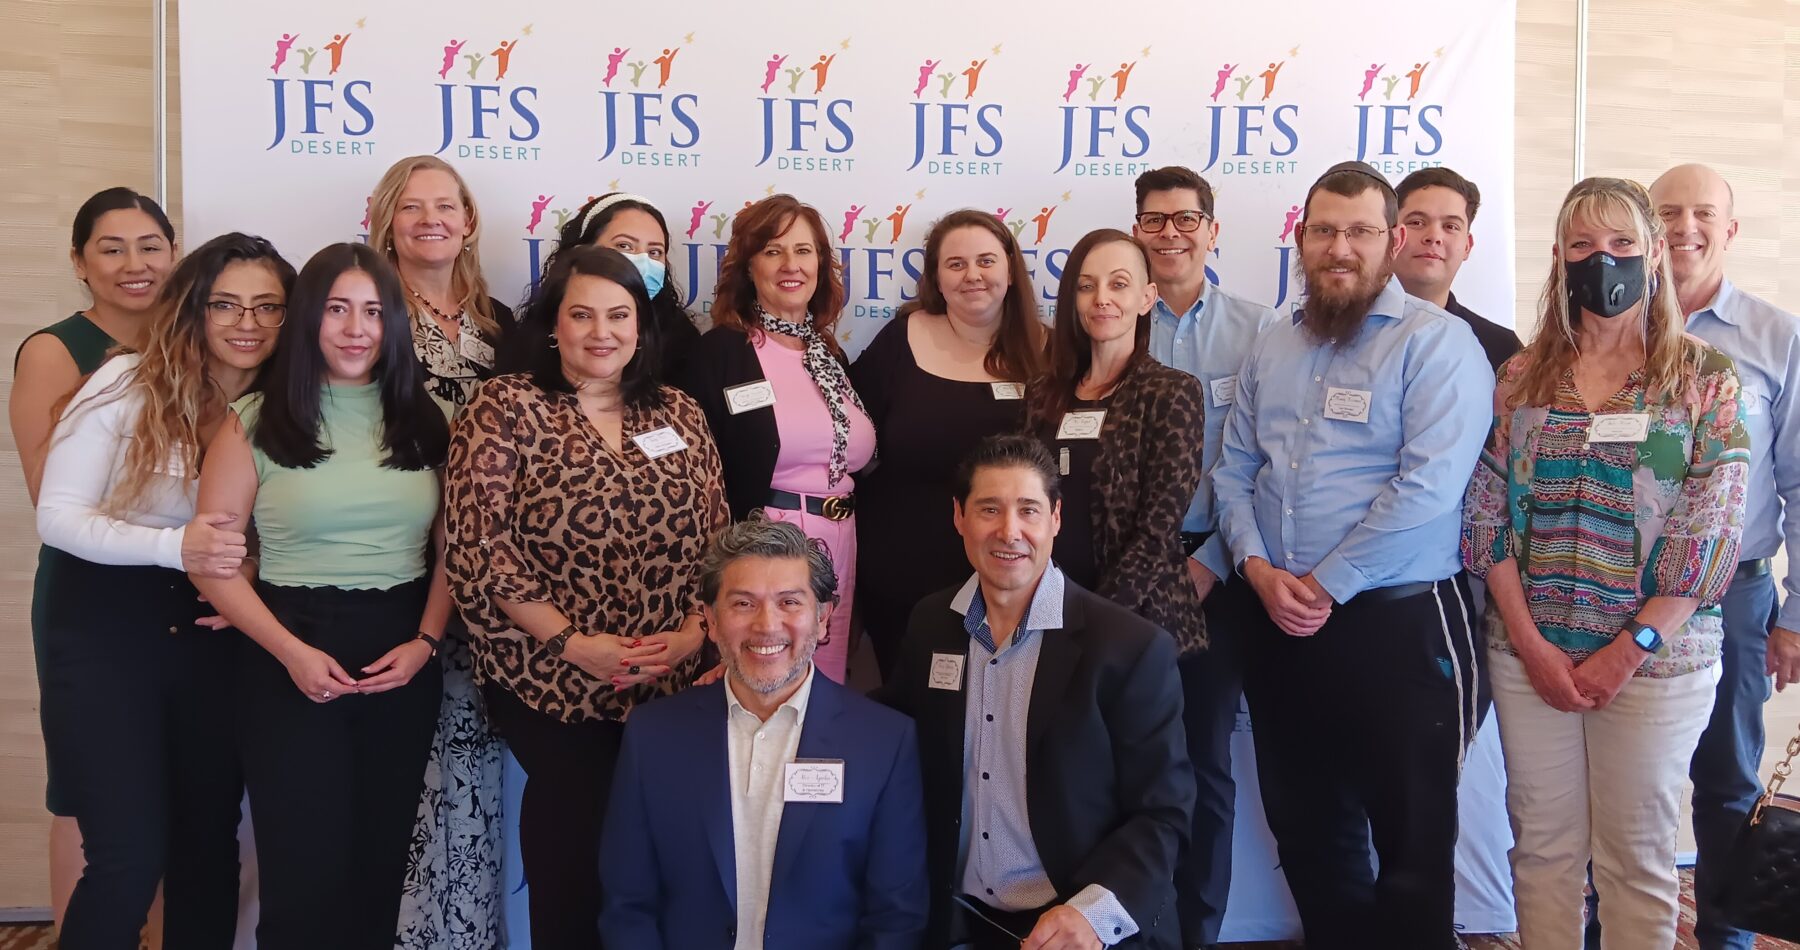 JFS staff gathered for annual photo